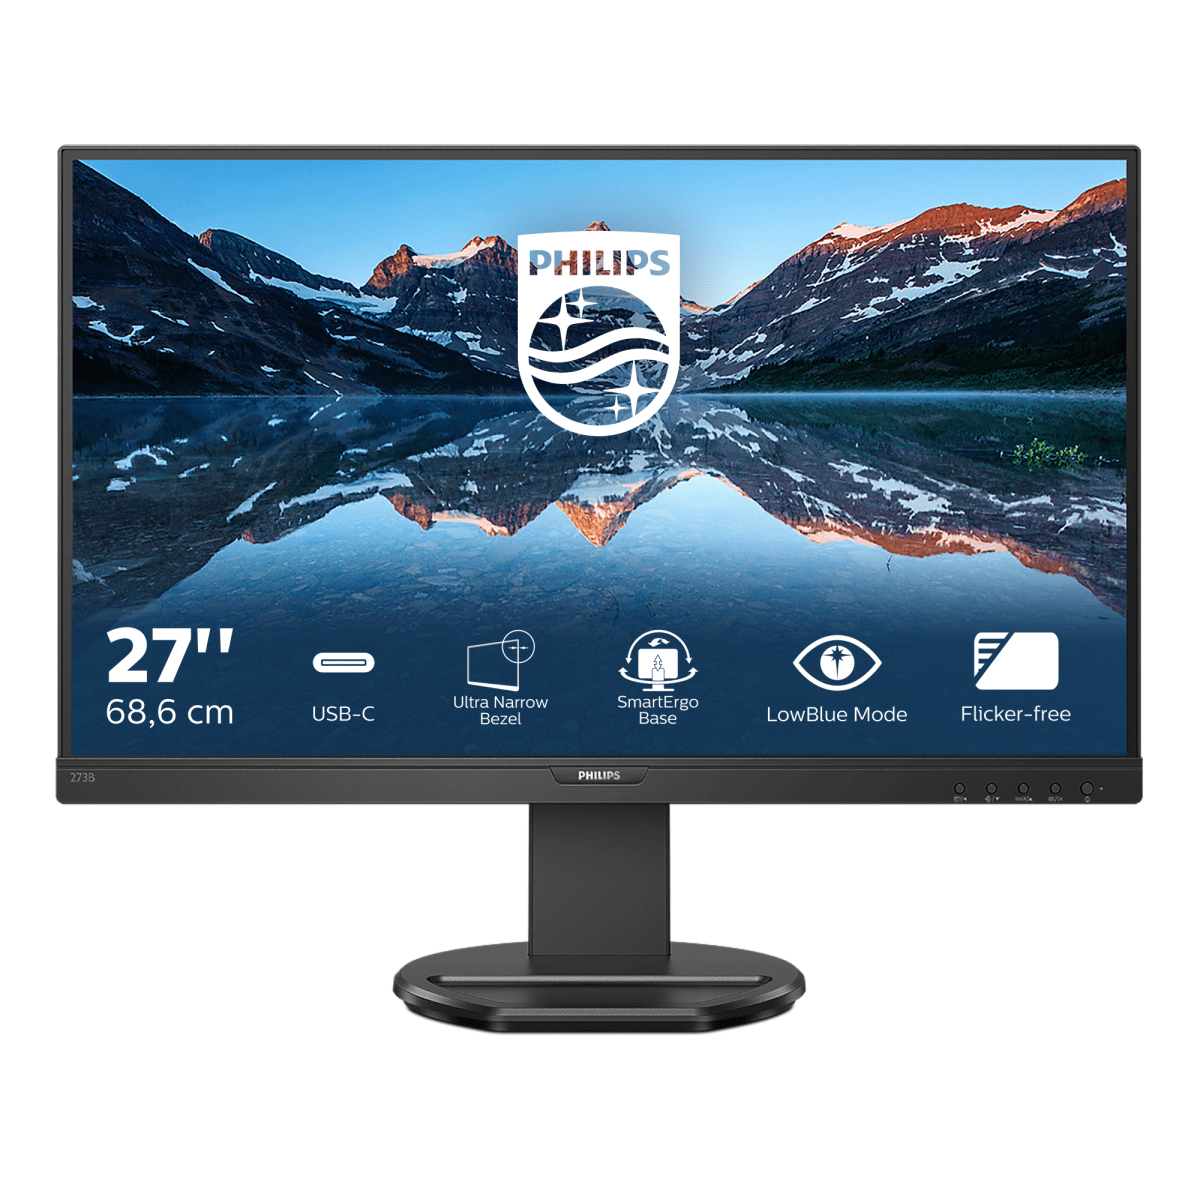 B Line 27" (68.6 cm) LCD monitor with USB-C